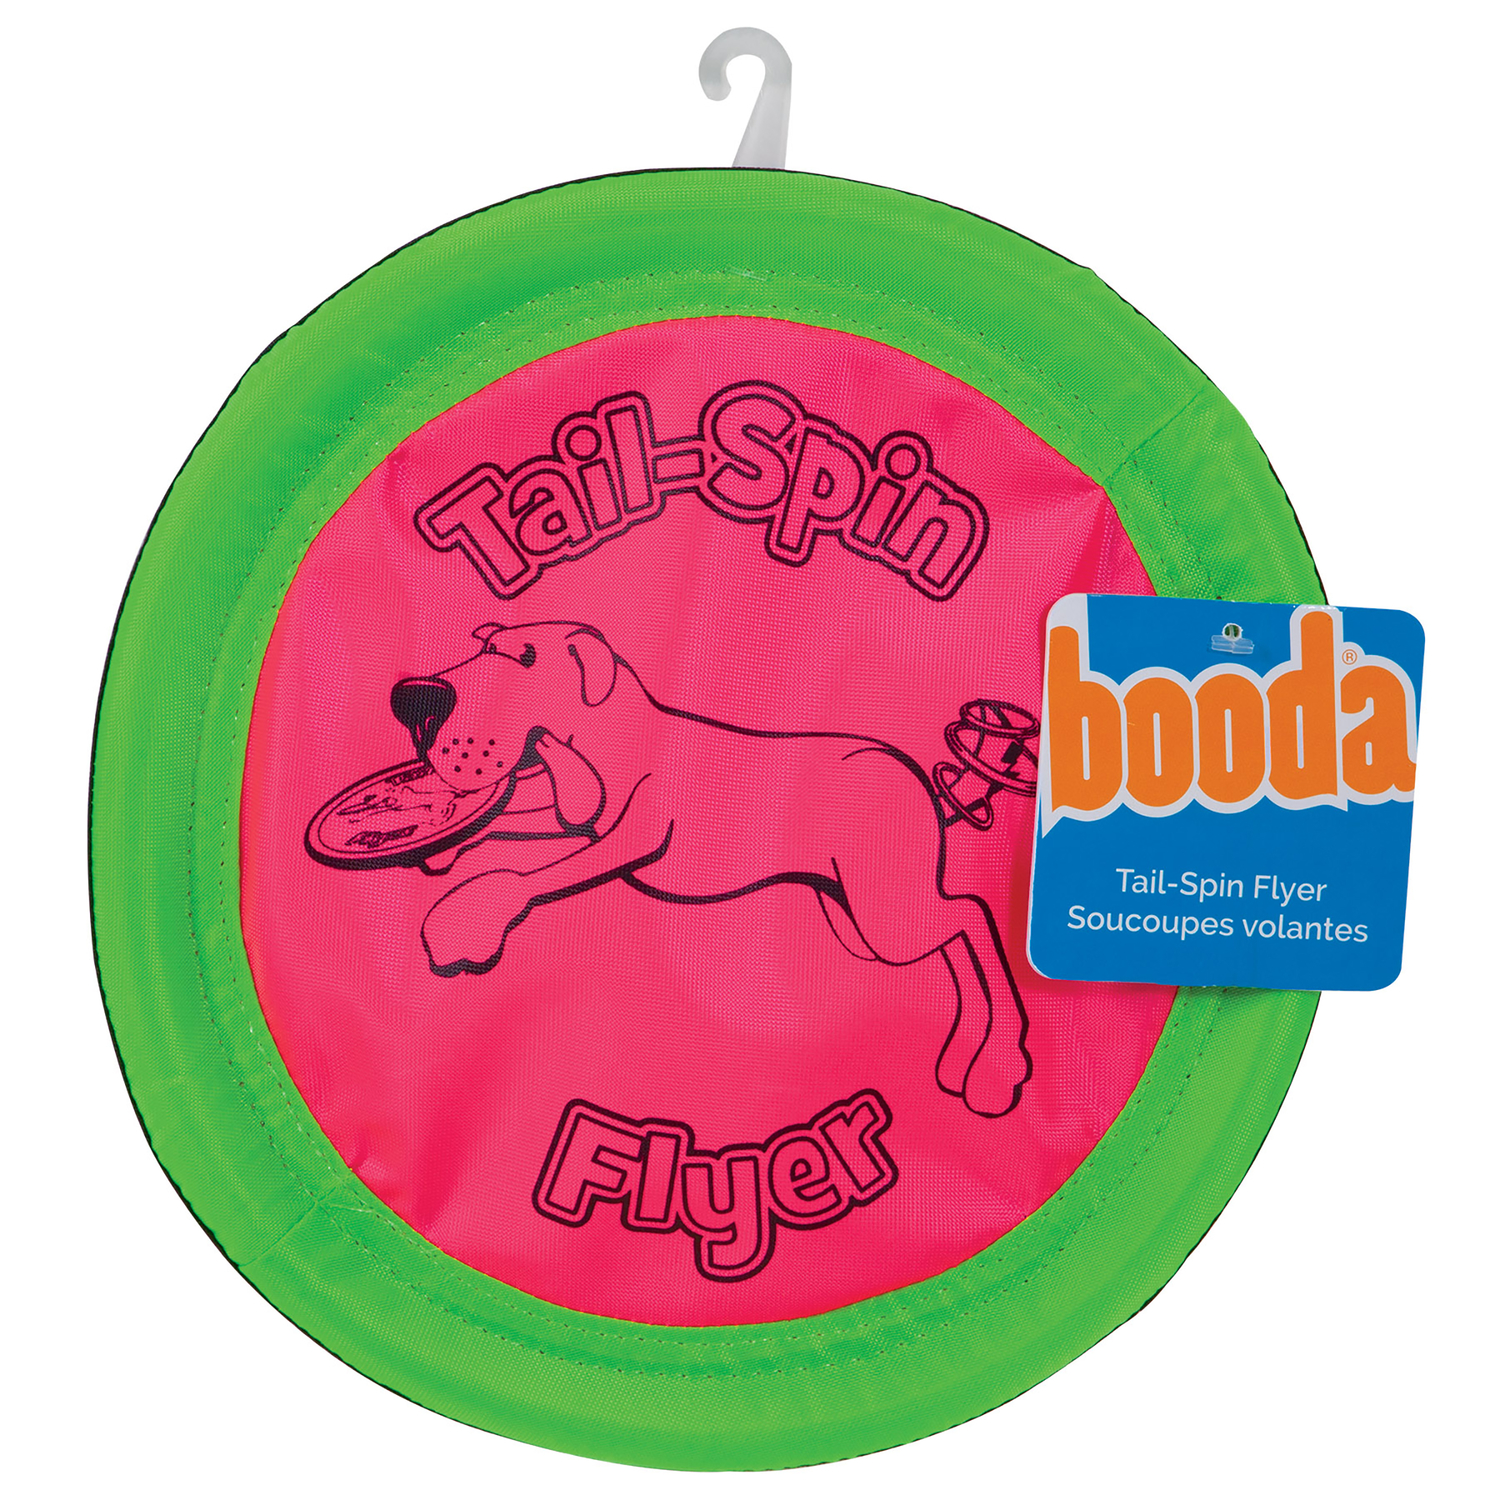 Photos - Other interior and decor Petmate Booda Multicolored Fabric Flying Disc Dog Toy Medium 1 pk 07025 